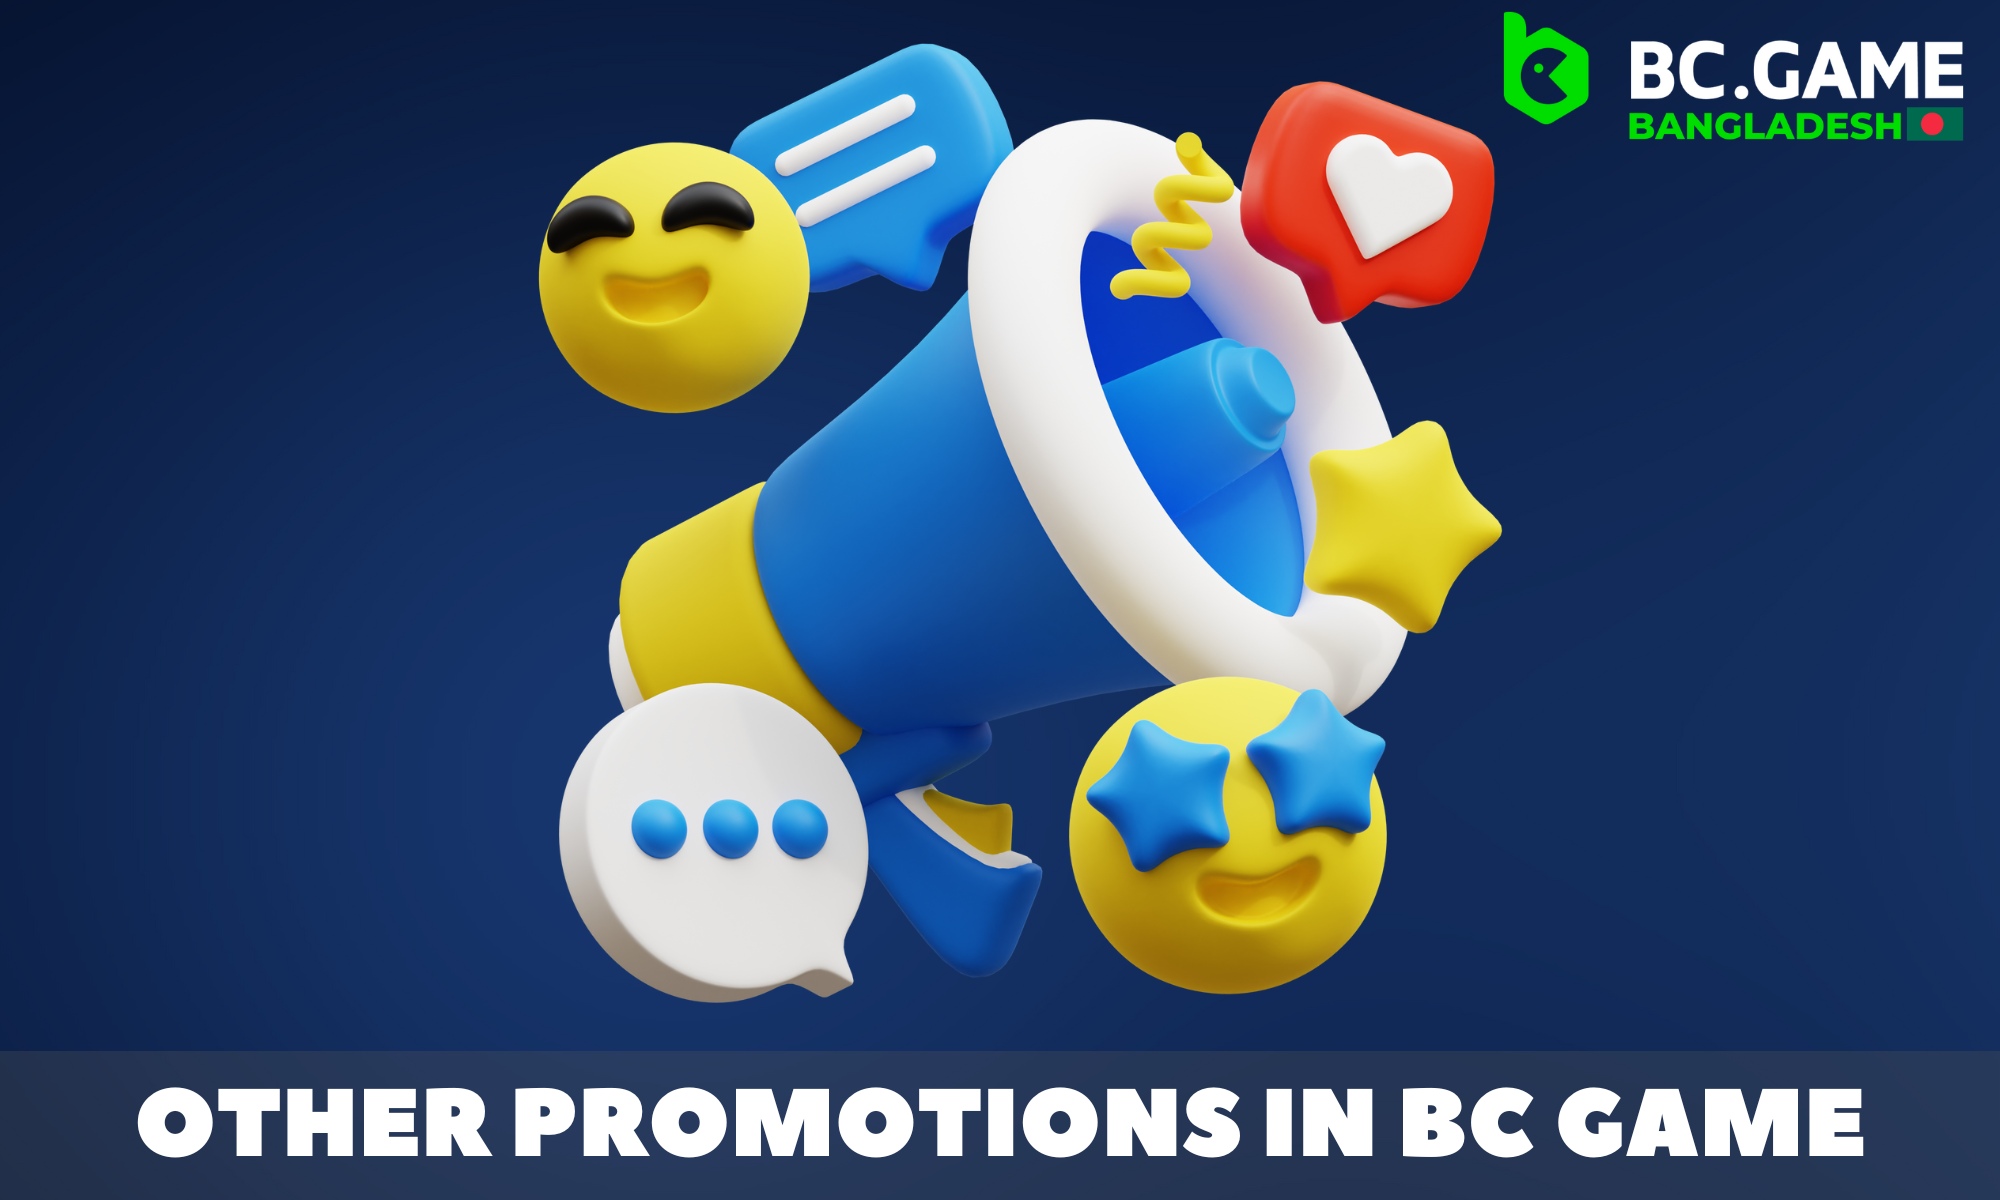 A large number of bonuses and promotions are constantly available at BC Game